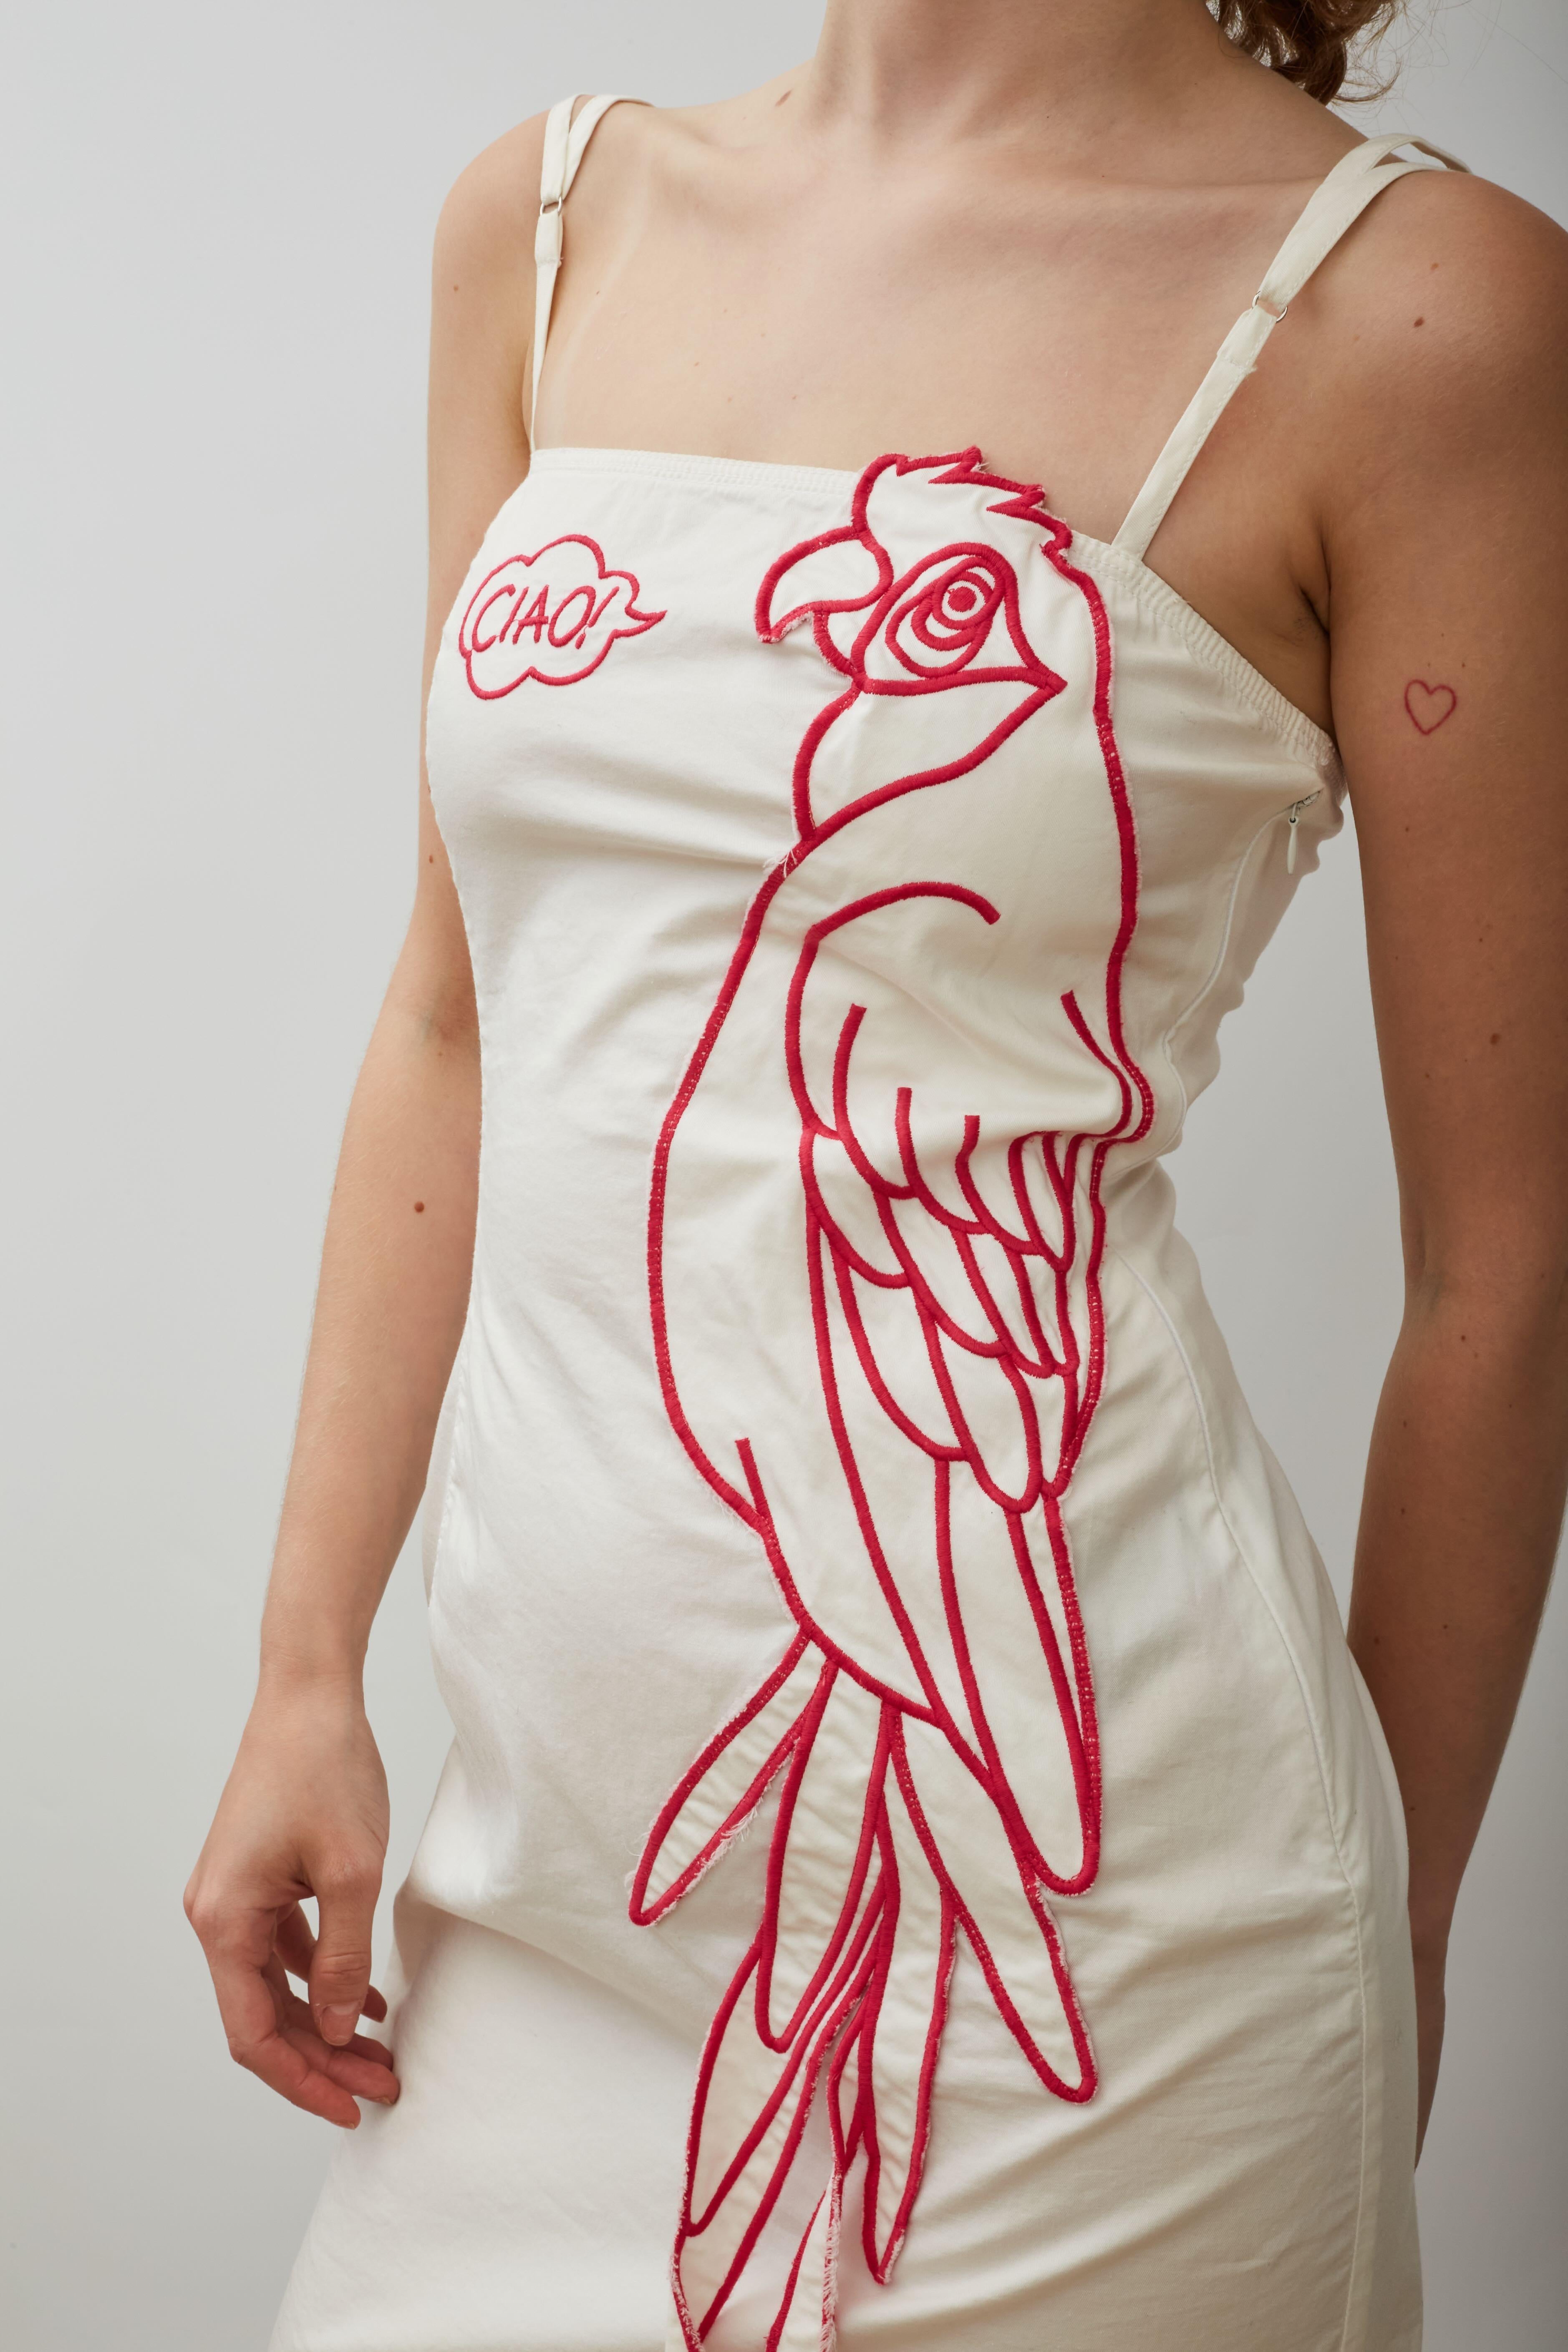 Women's or Men's Moschino Parrot Ciao White Cotton Dress (US 8)